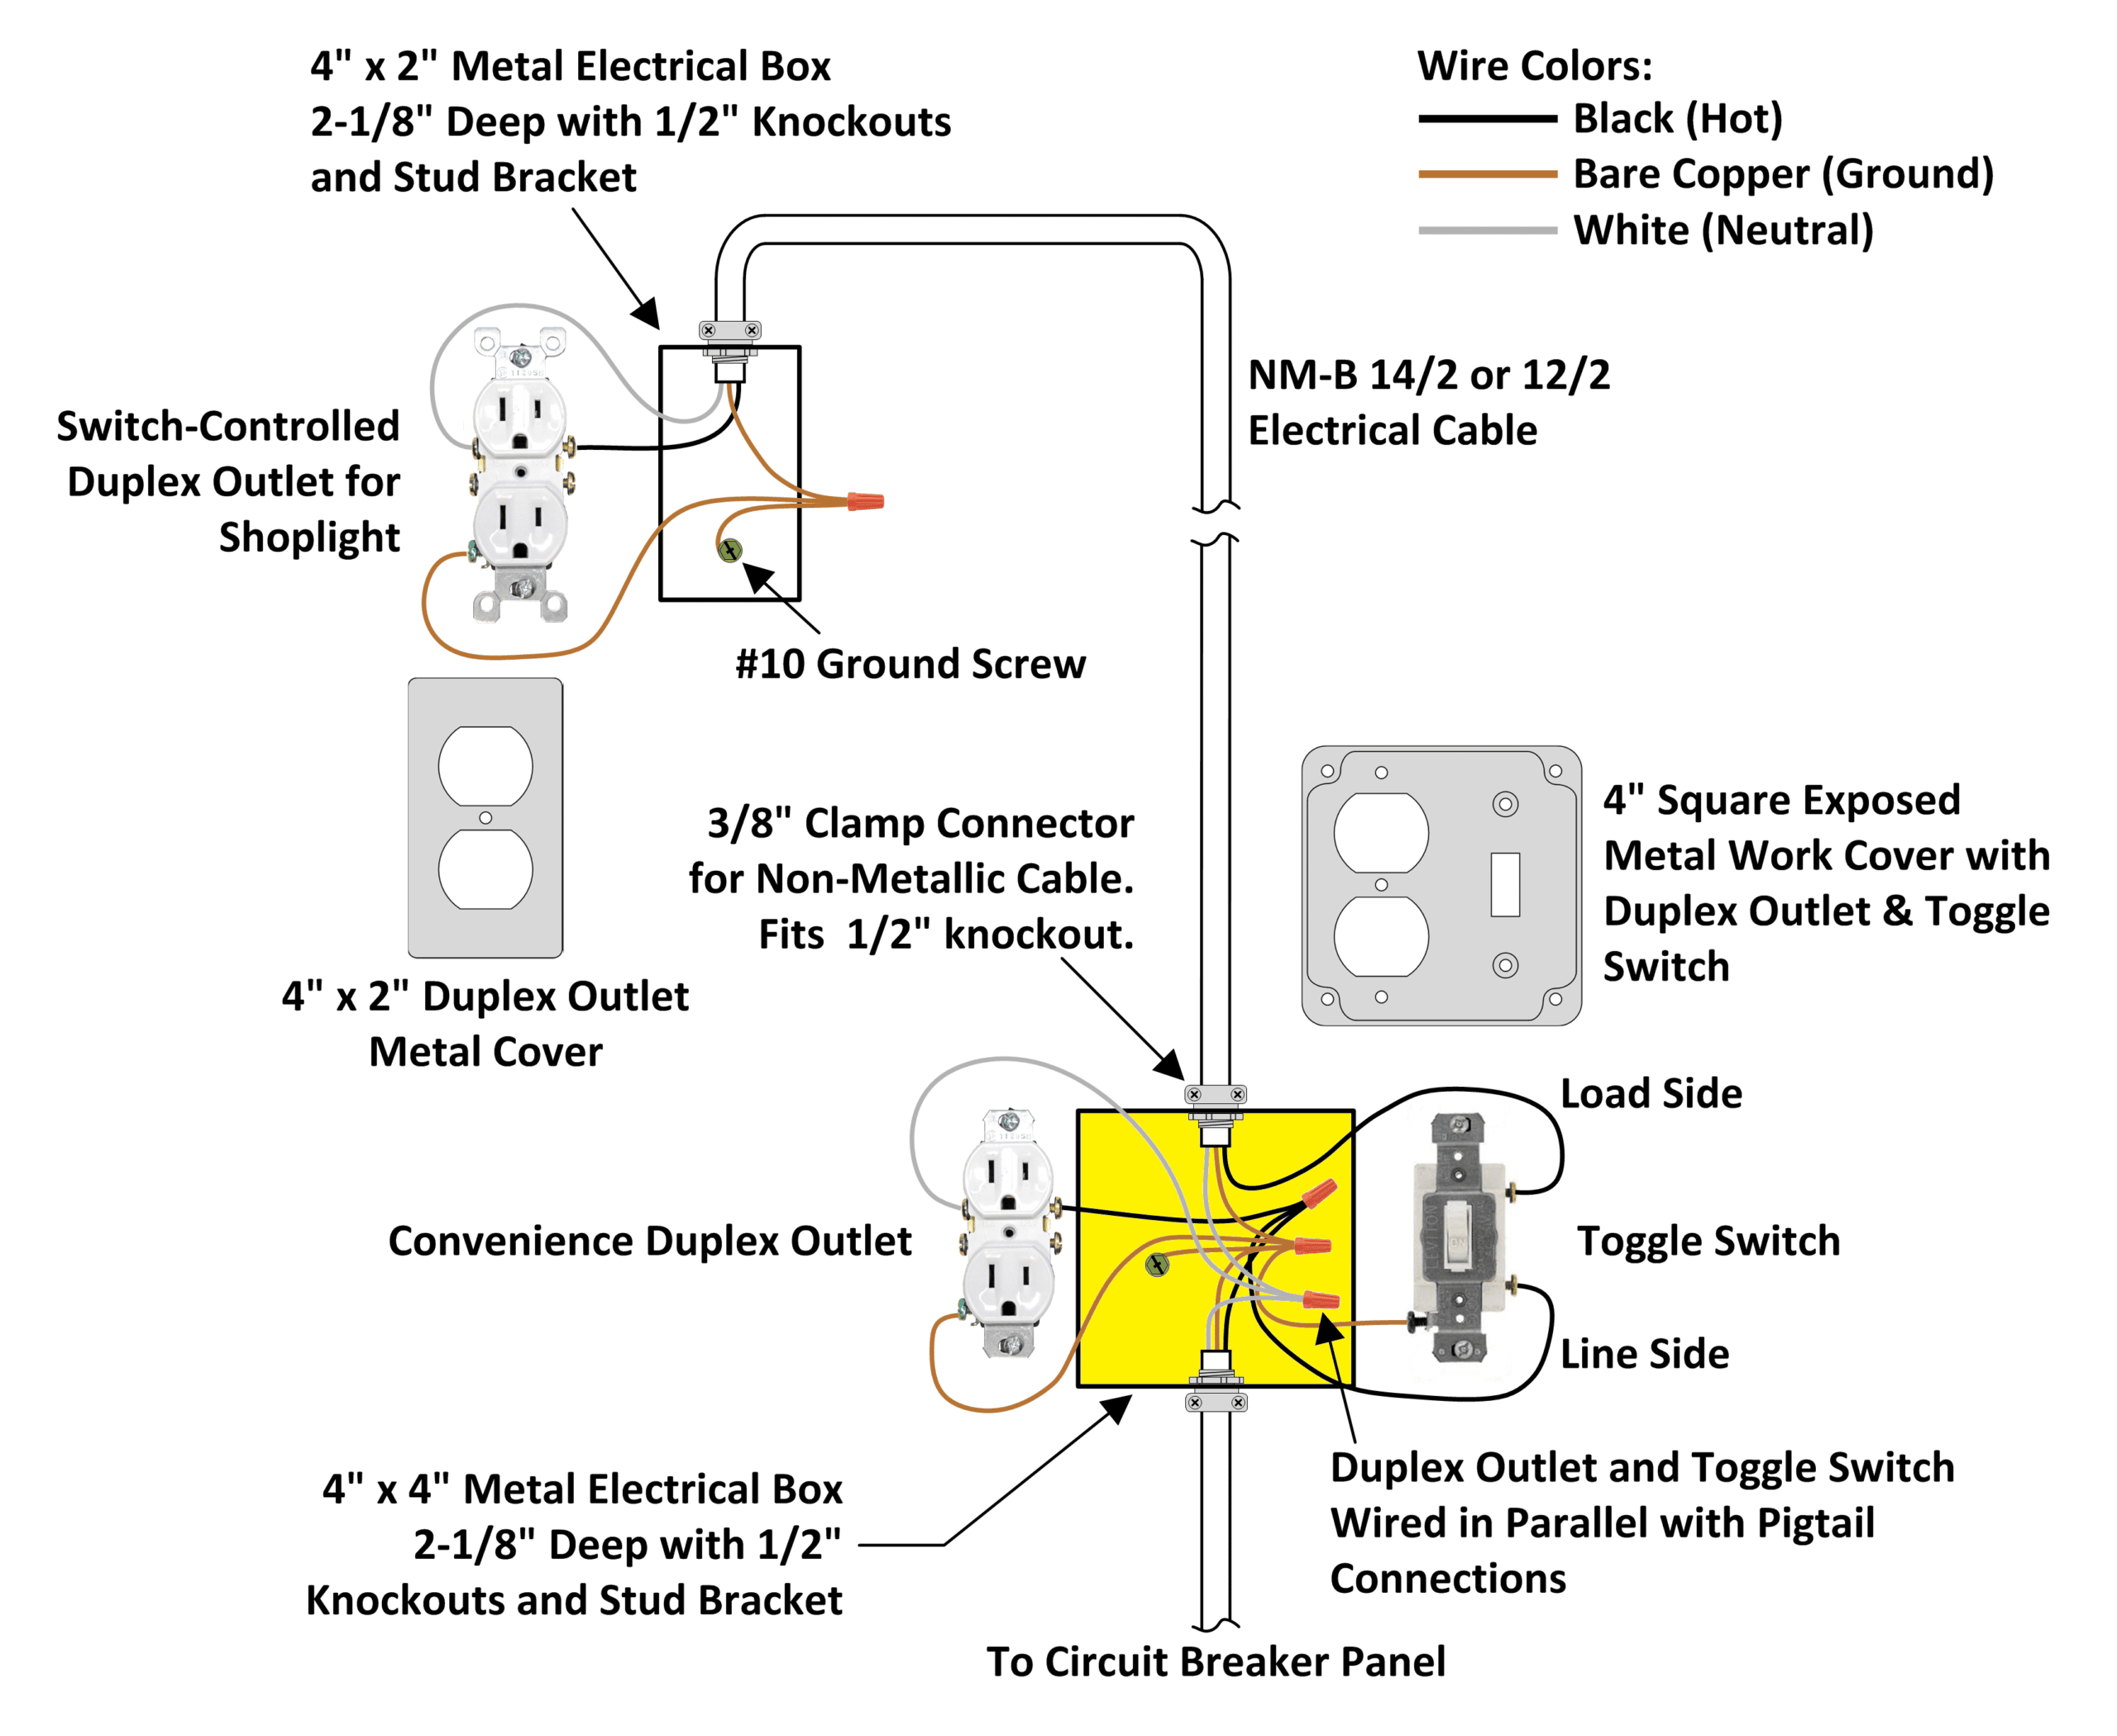 Inch Junction Box And Exposed Work Cover Wiring Diagram